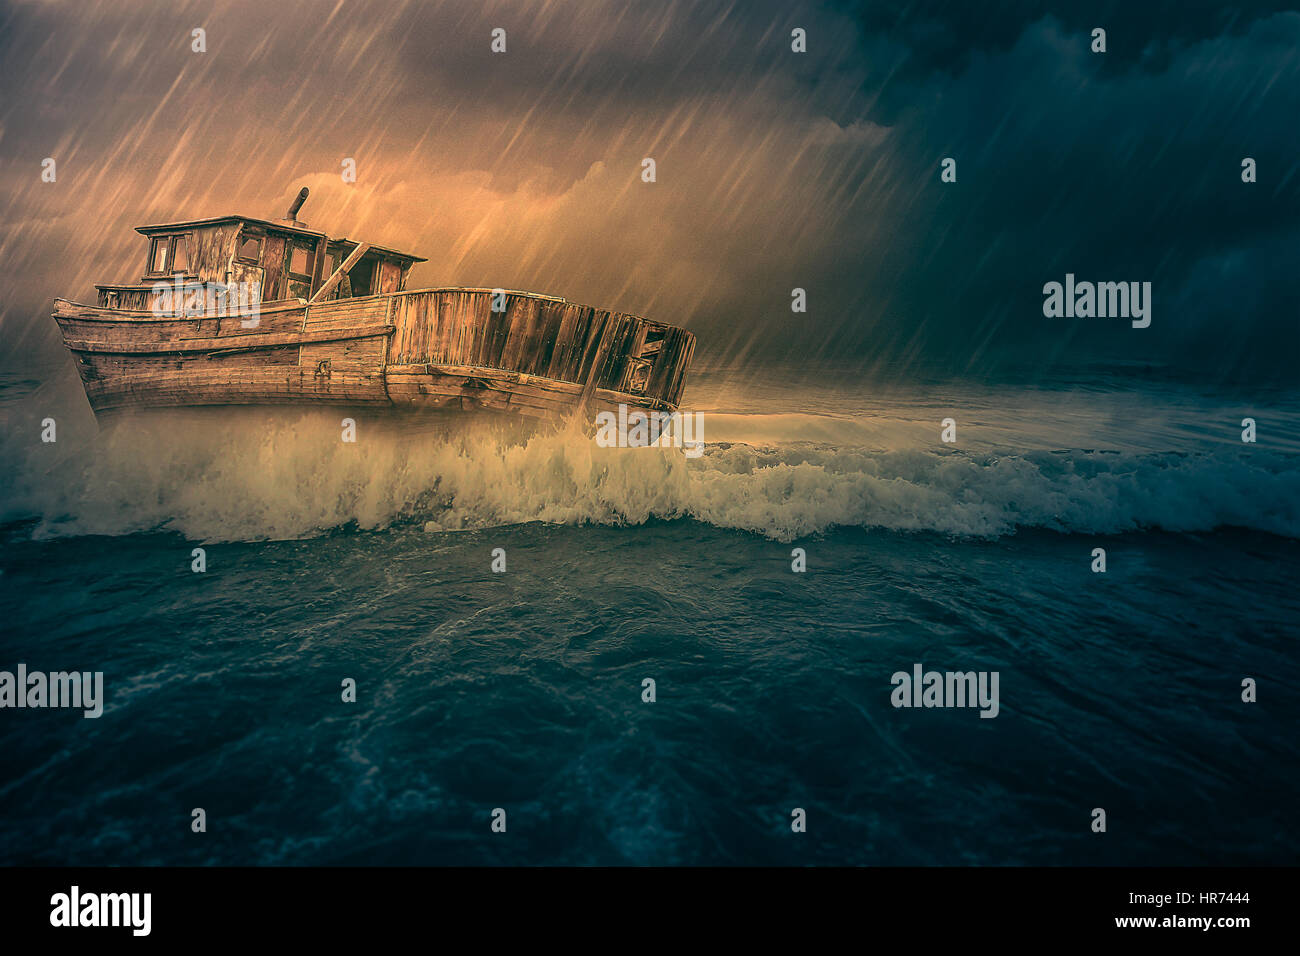 Shipwreck in a big storm Stock Photo